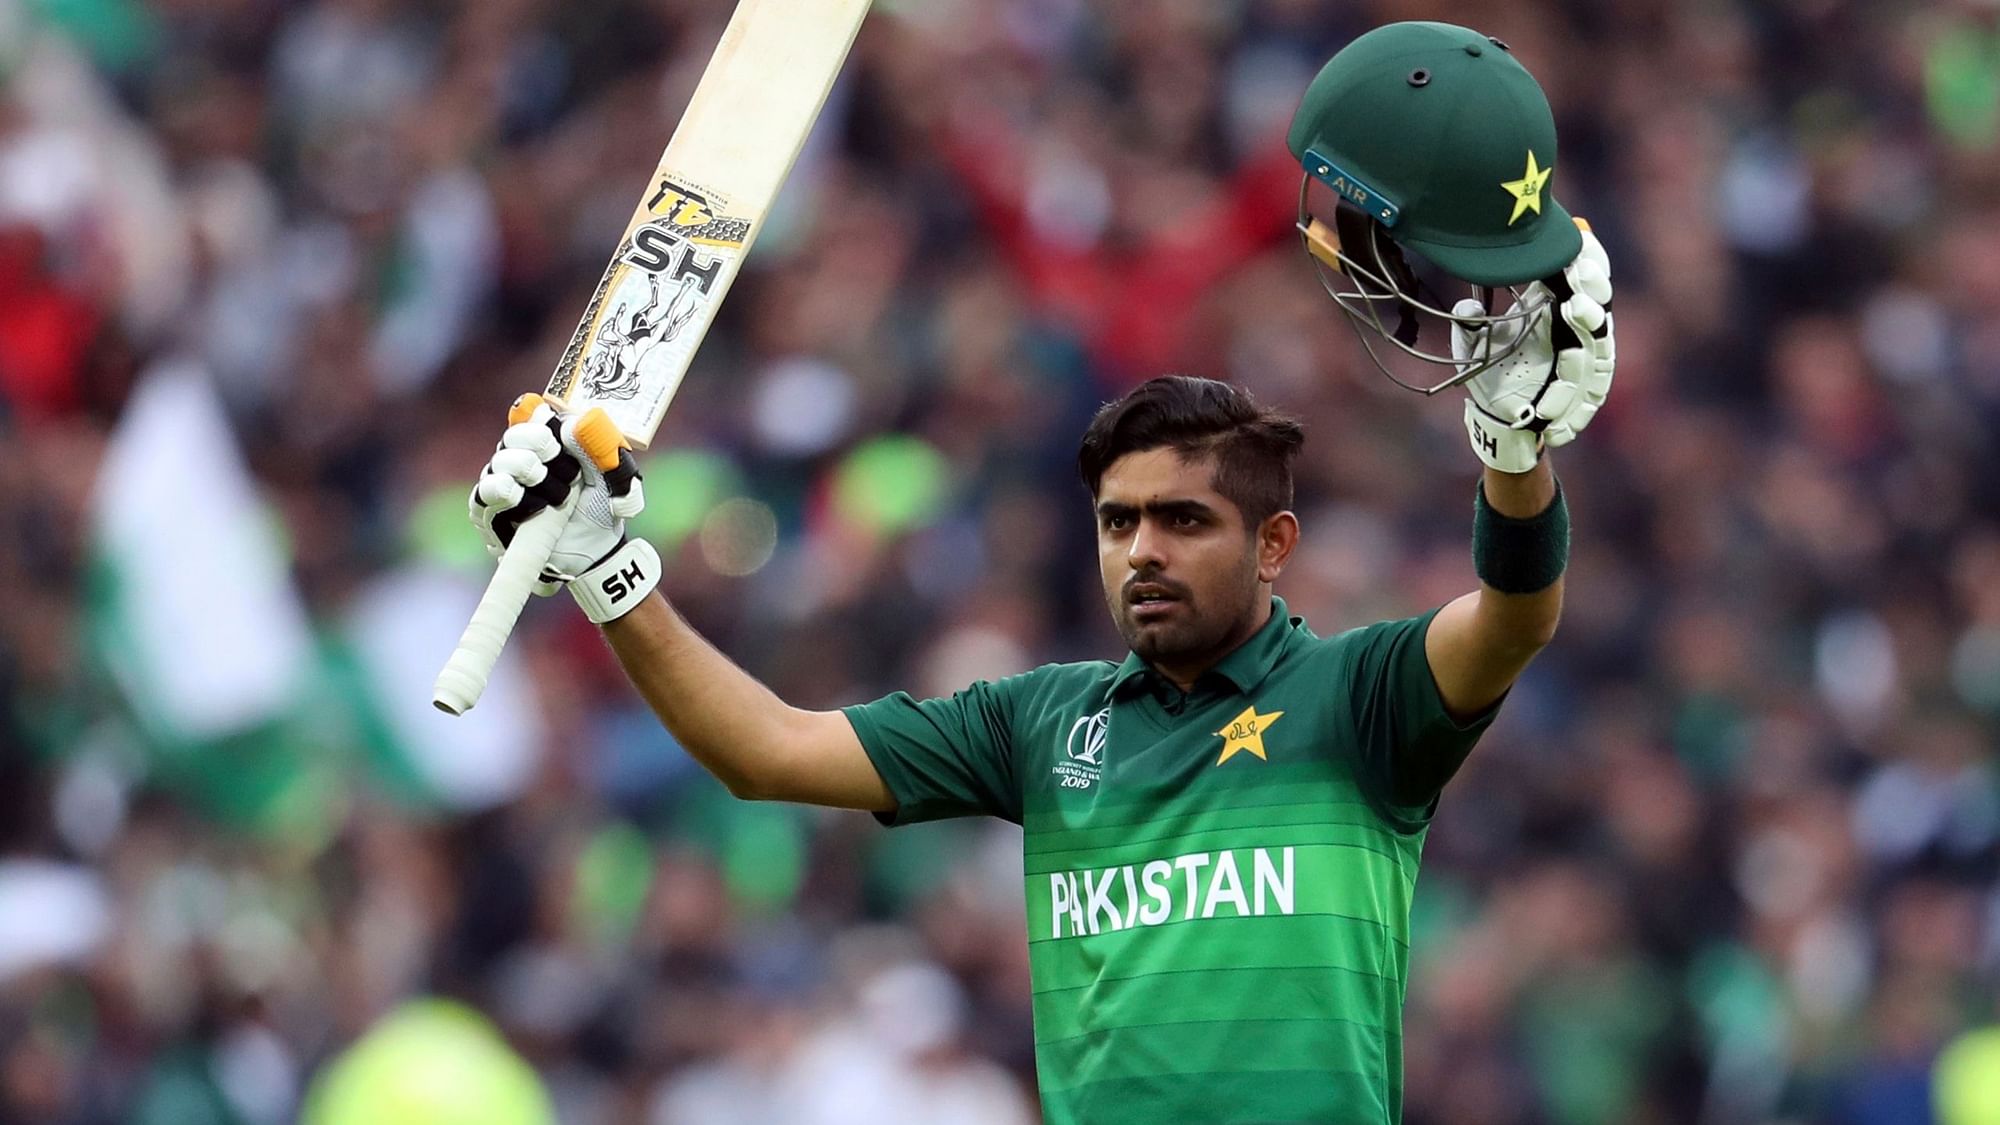 Babar Azam has been appointed to lead Pakistan in both ODIs and T20 internationals in the 2020-21 season.